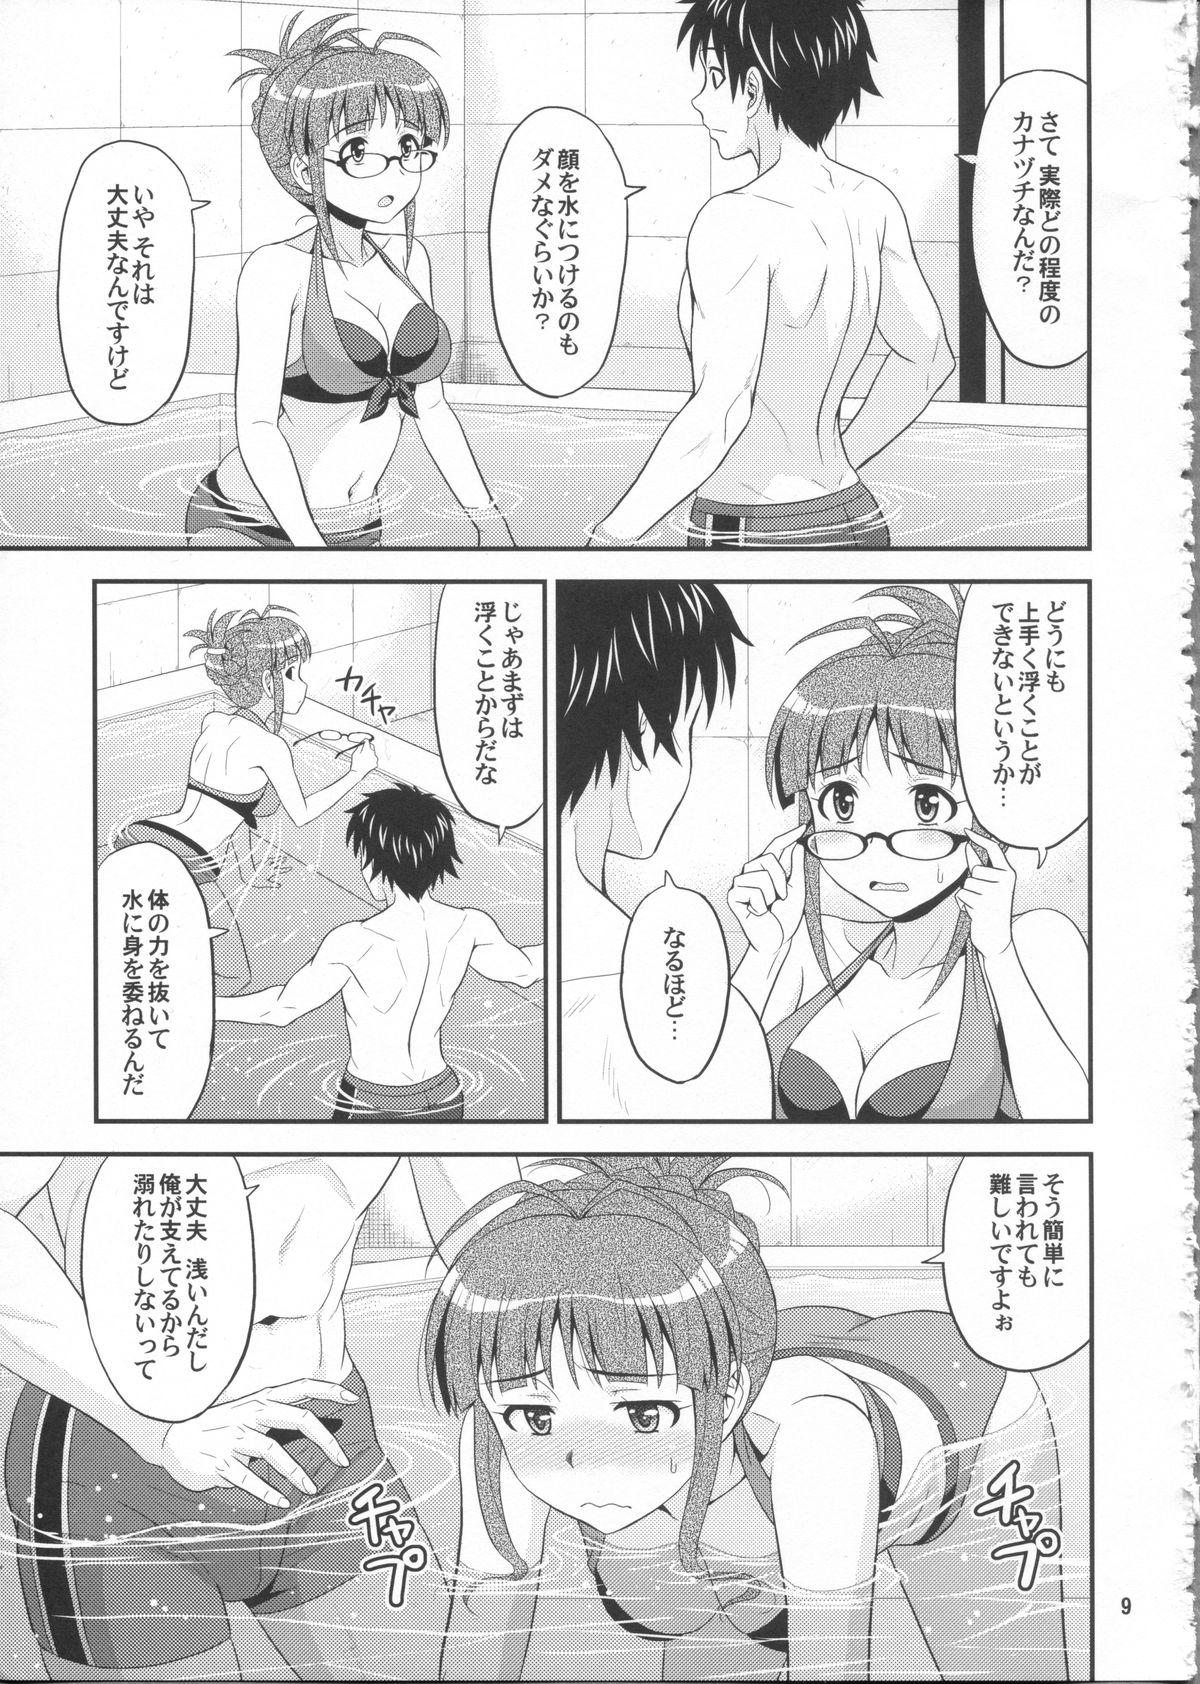 European Training for You! - The idolmaster Anal Sex - Page 9